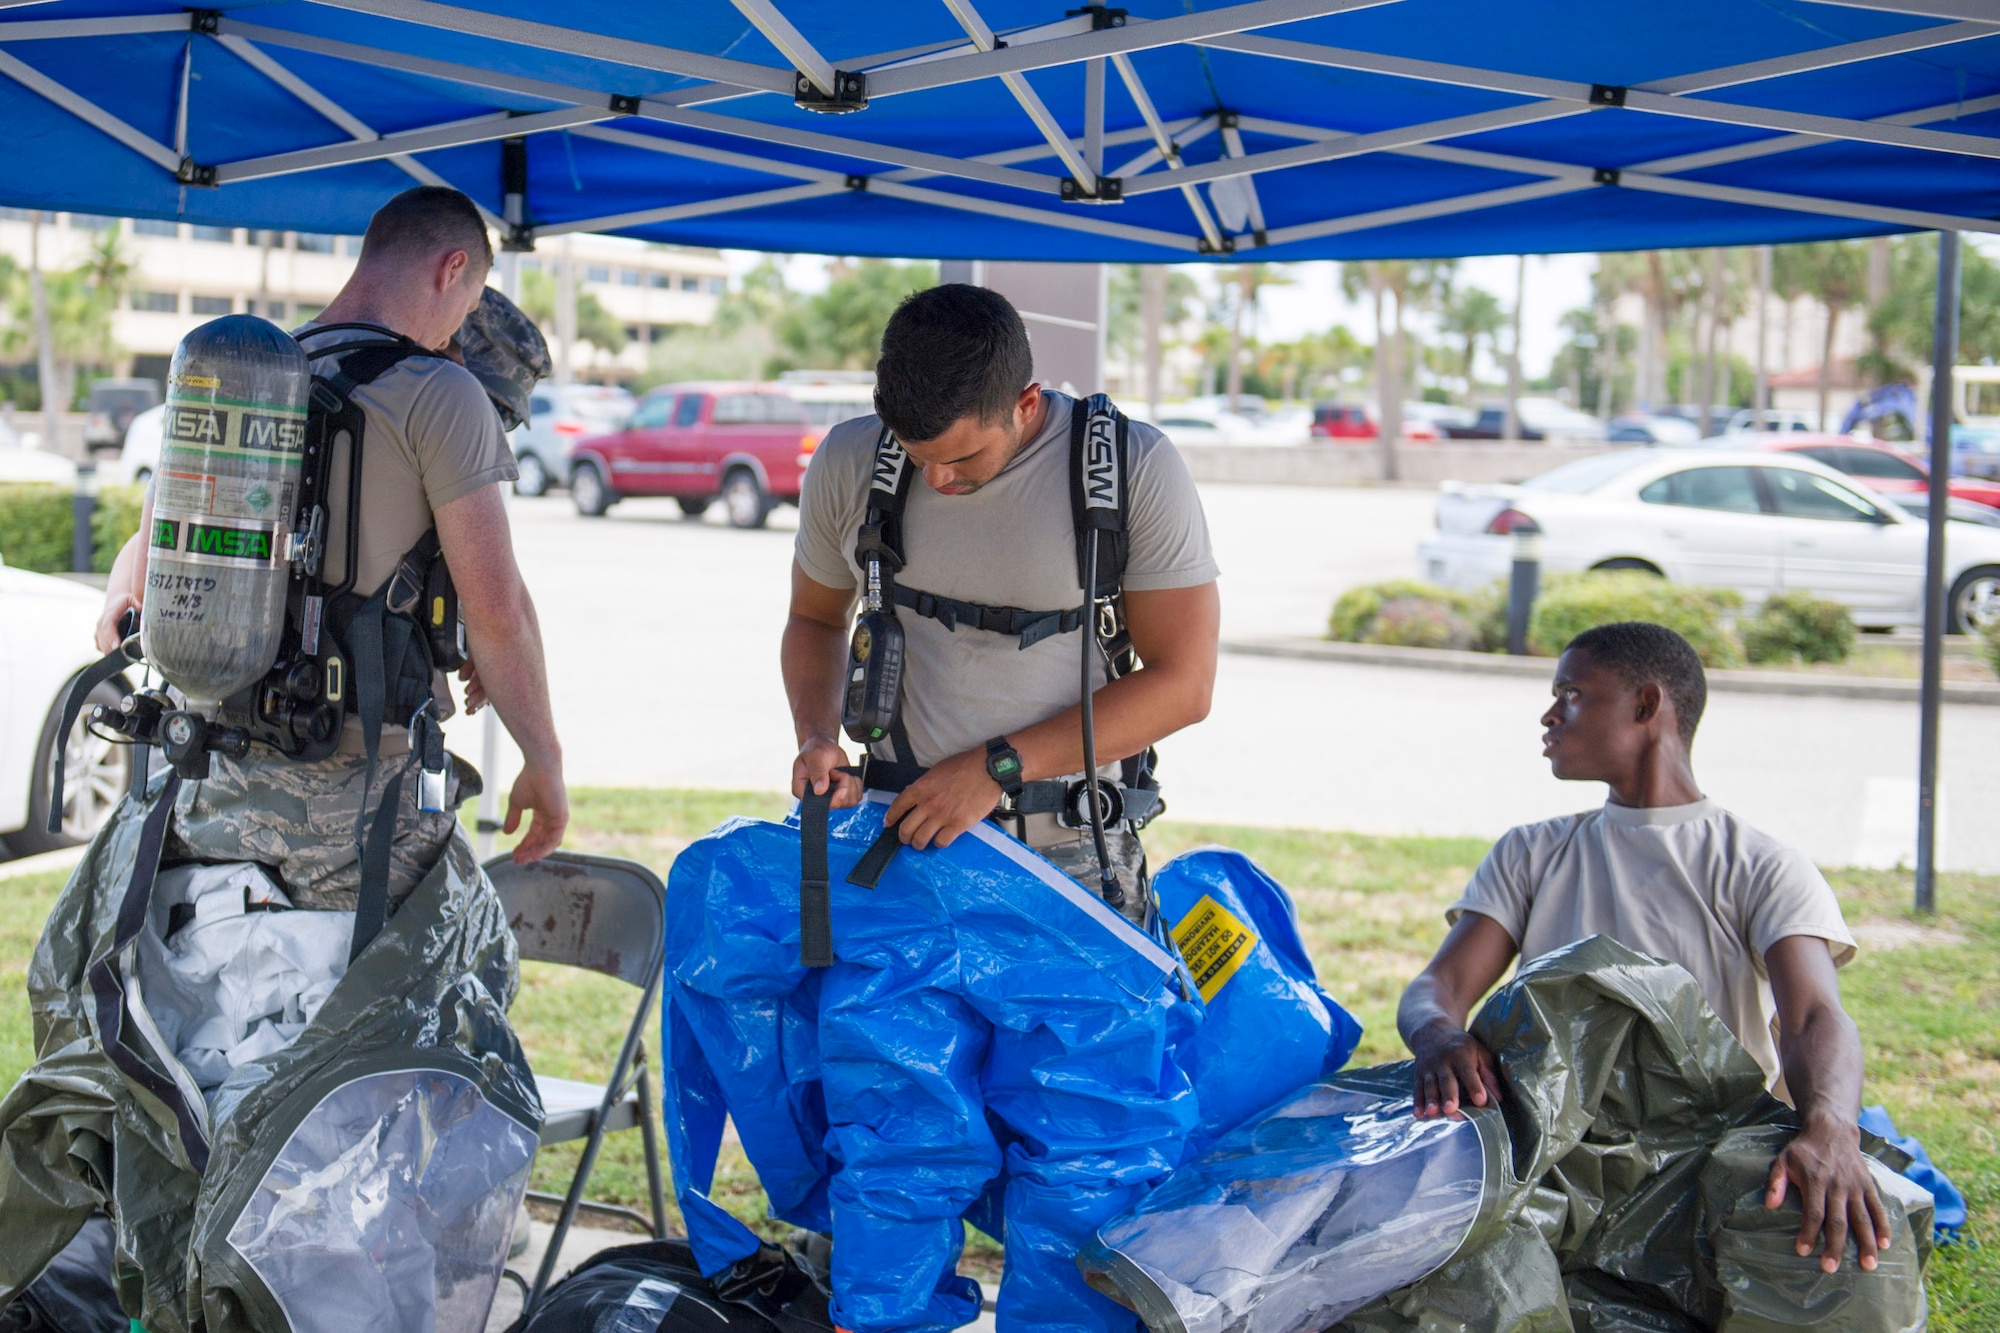 Members of 45th Medical Group's bioenvironmental flight suit up for training and respond to a simulated incident at the Patrick Air Force Base Post Office June 29, 2016. Their goal during the exercise was to train in identifying and evaluating environments that could harm personnel and families at the installation. In addition, they tested their response time and the safety equipment they are required to use when a HAZMAT threat exists. (U.S. Air Force photo by Matthew Jurgens/Released)